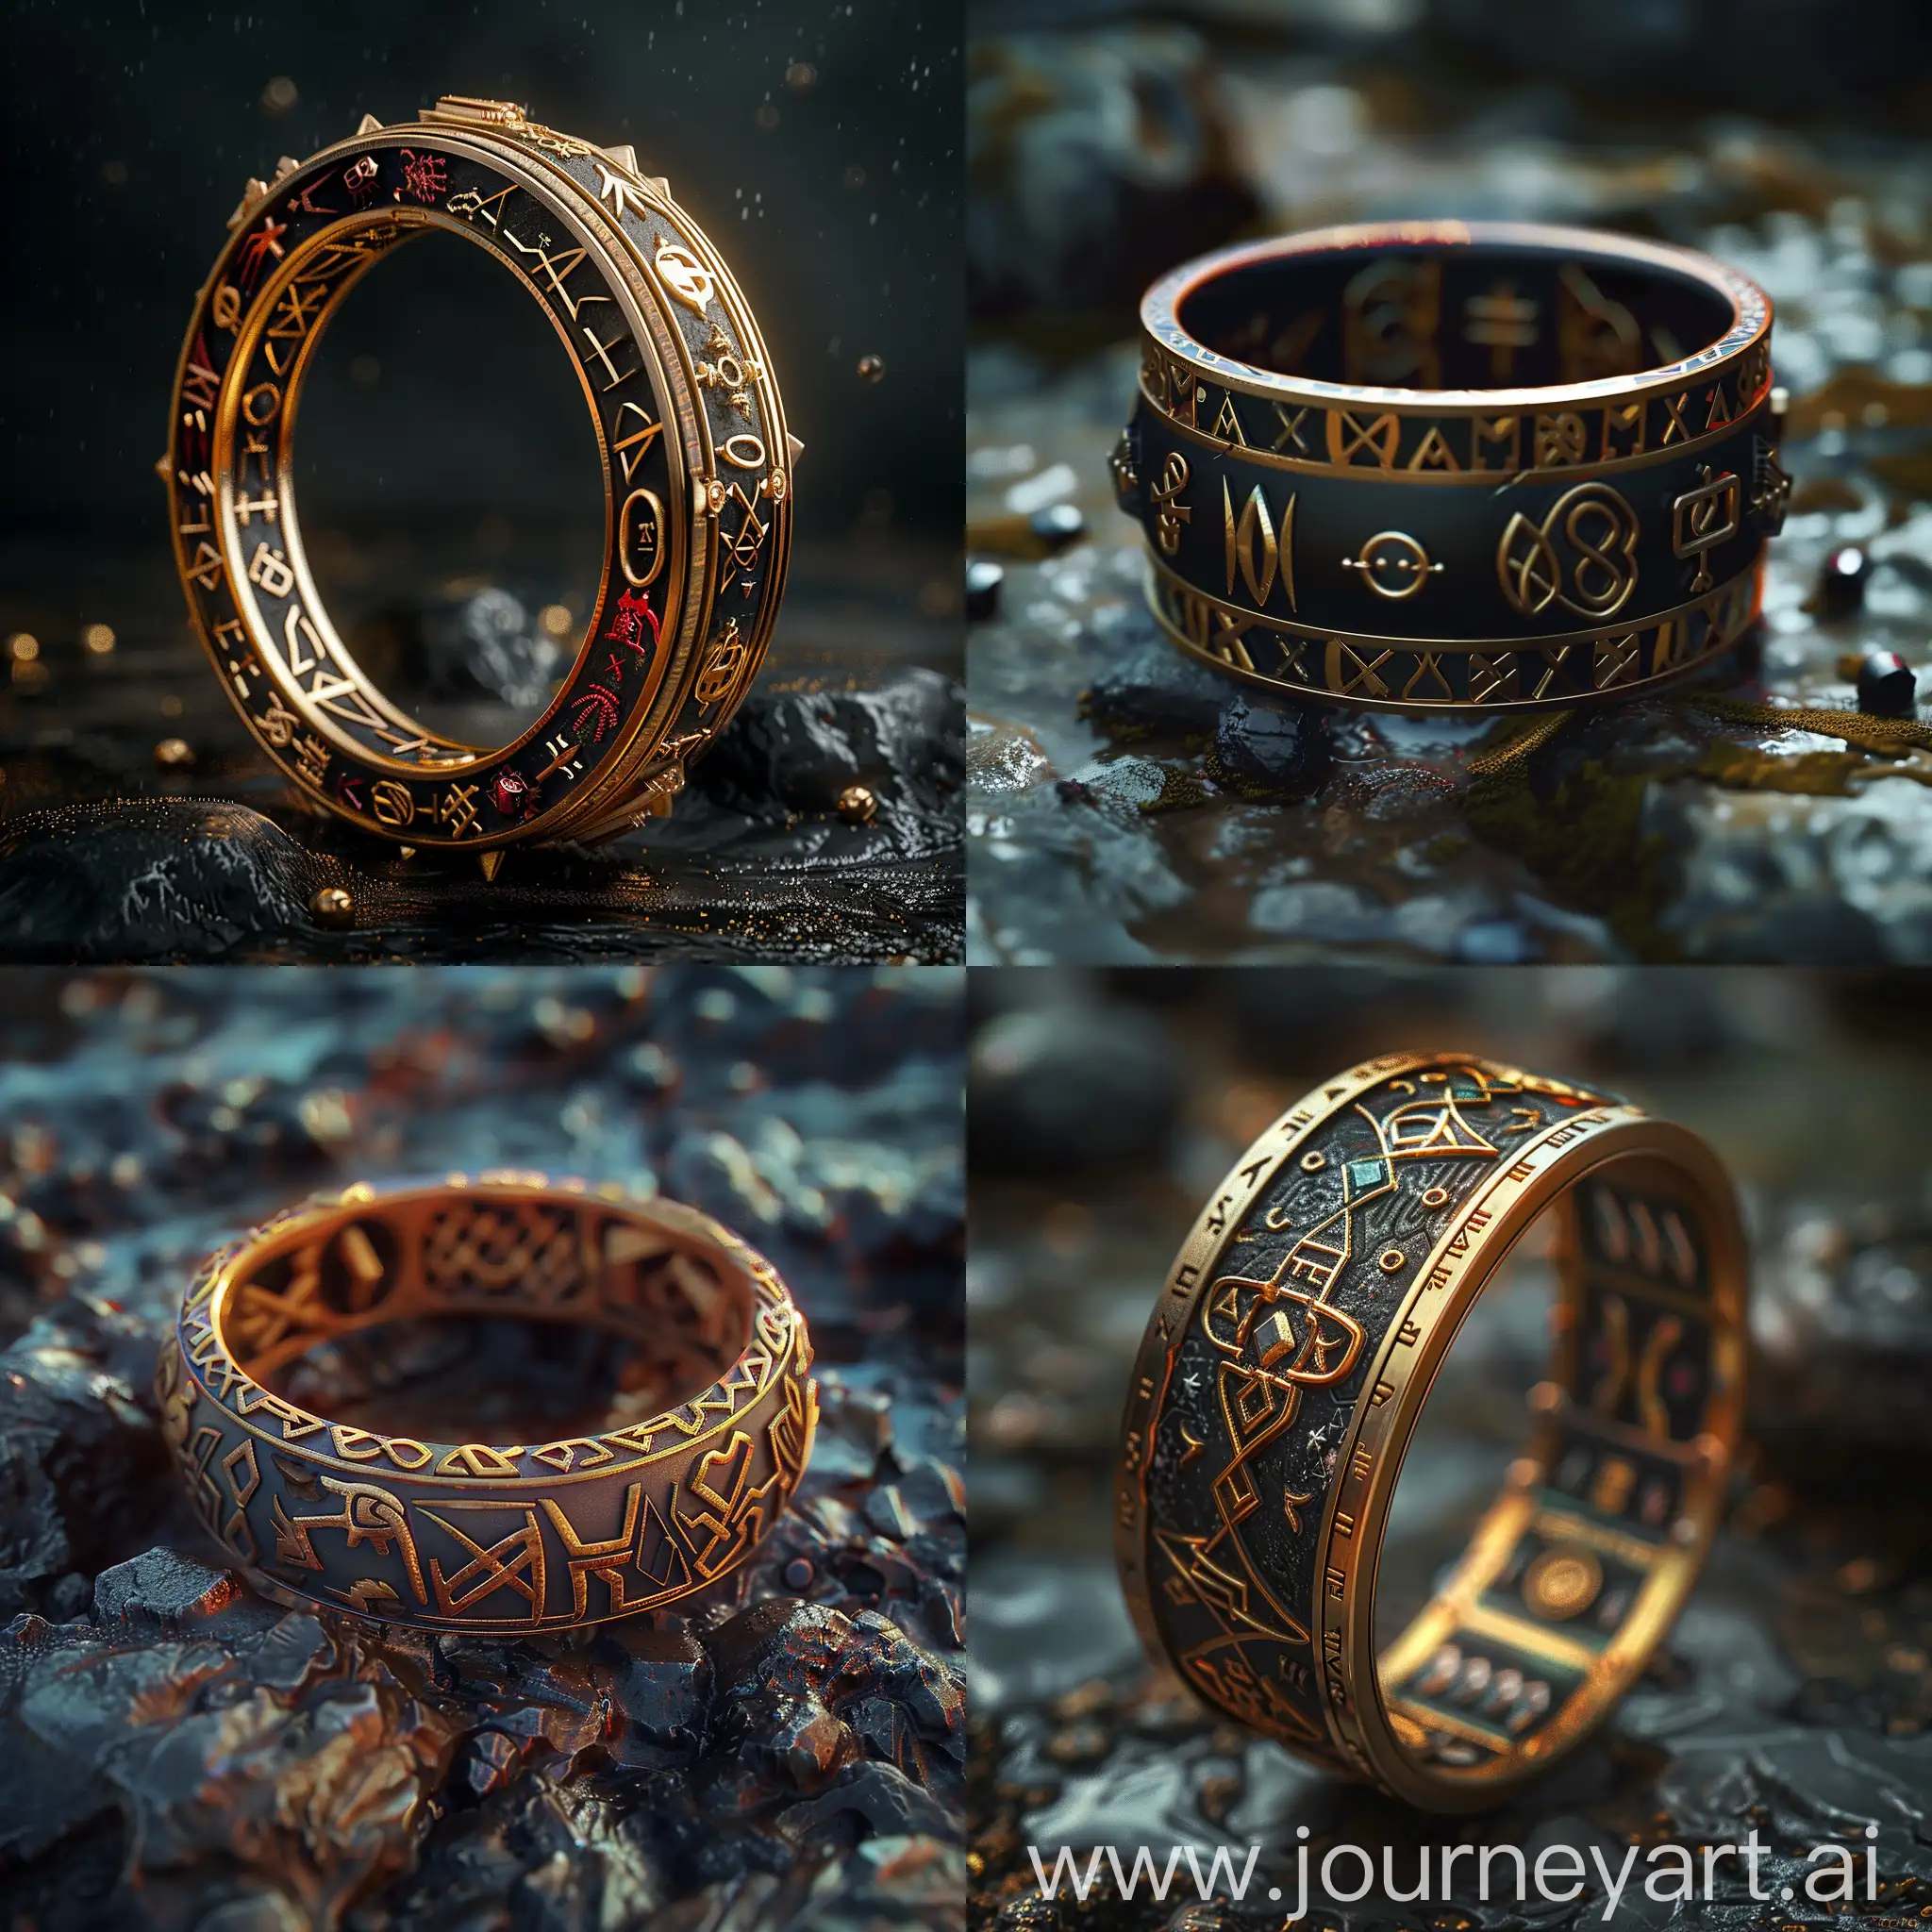 Eternal-Circle-of-Life-Depicted-Through-Symbolic-Ring-with-Runes